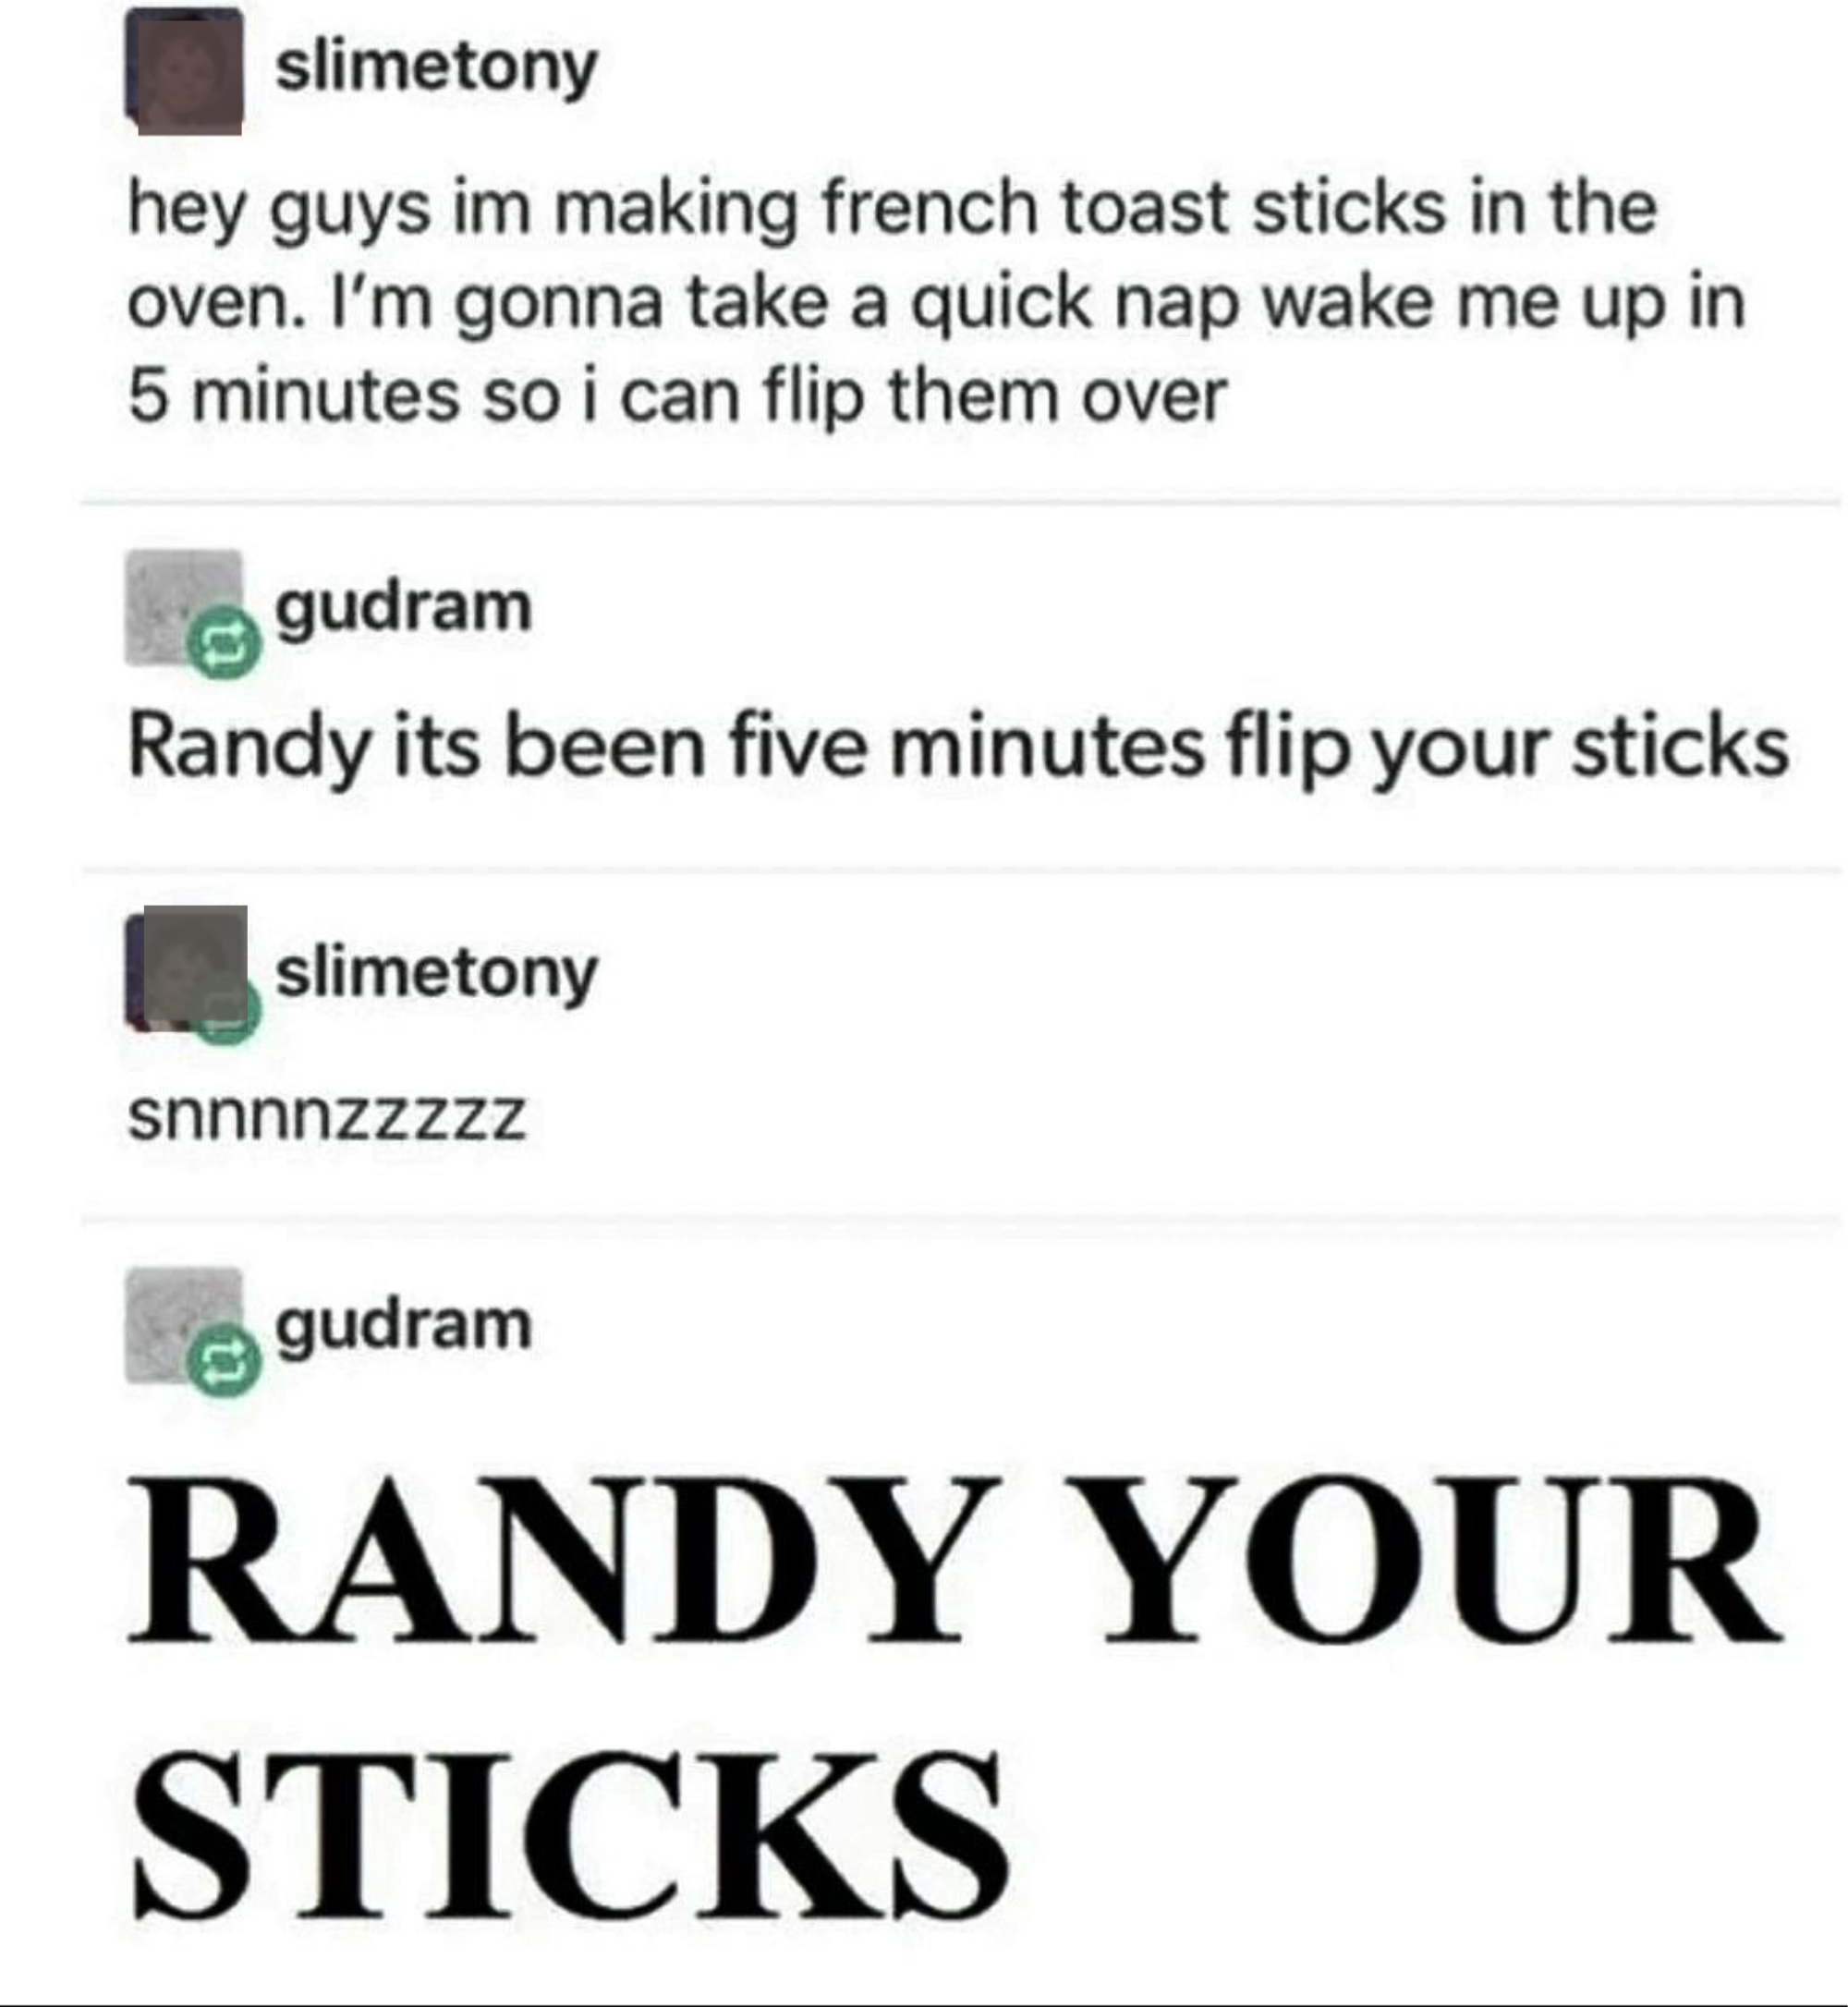 &quot;Hey guys I&#x27;m making French toast sticks in the oven; I&#x27;m gonna take a quick nap, wake me up in 5 minutes so I can flip them over&quot;; &quot;Randy it&#x27;s been 5 minutes, flip your sticks&quot; &quot;snnnzzzz,&quot; &#x27;RANDY YOUR STICKS&quot;